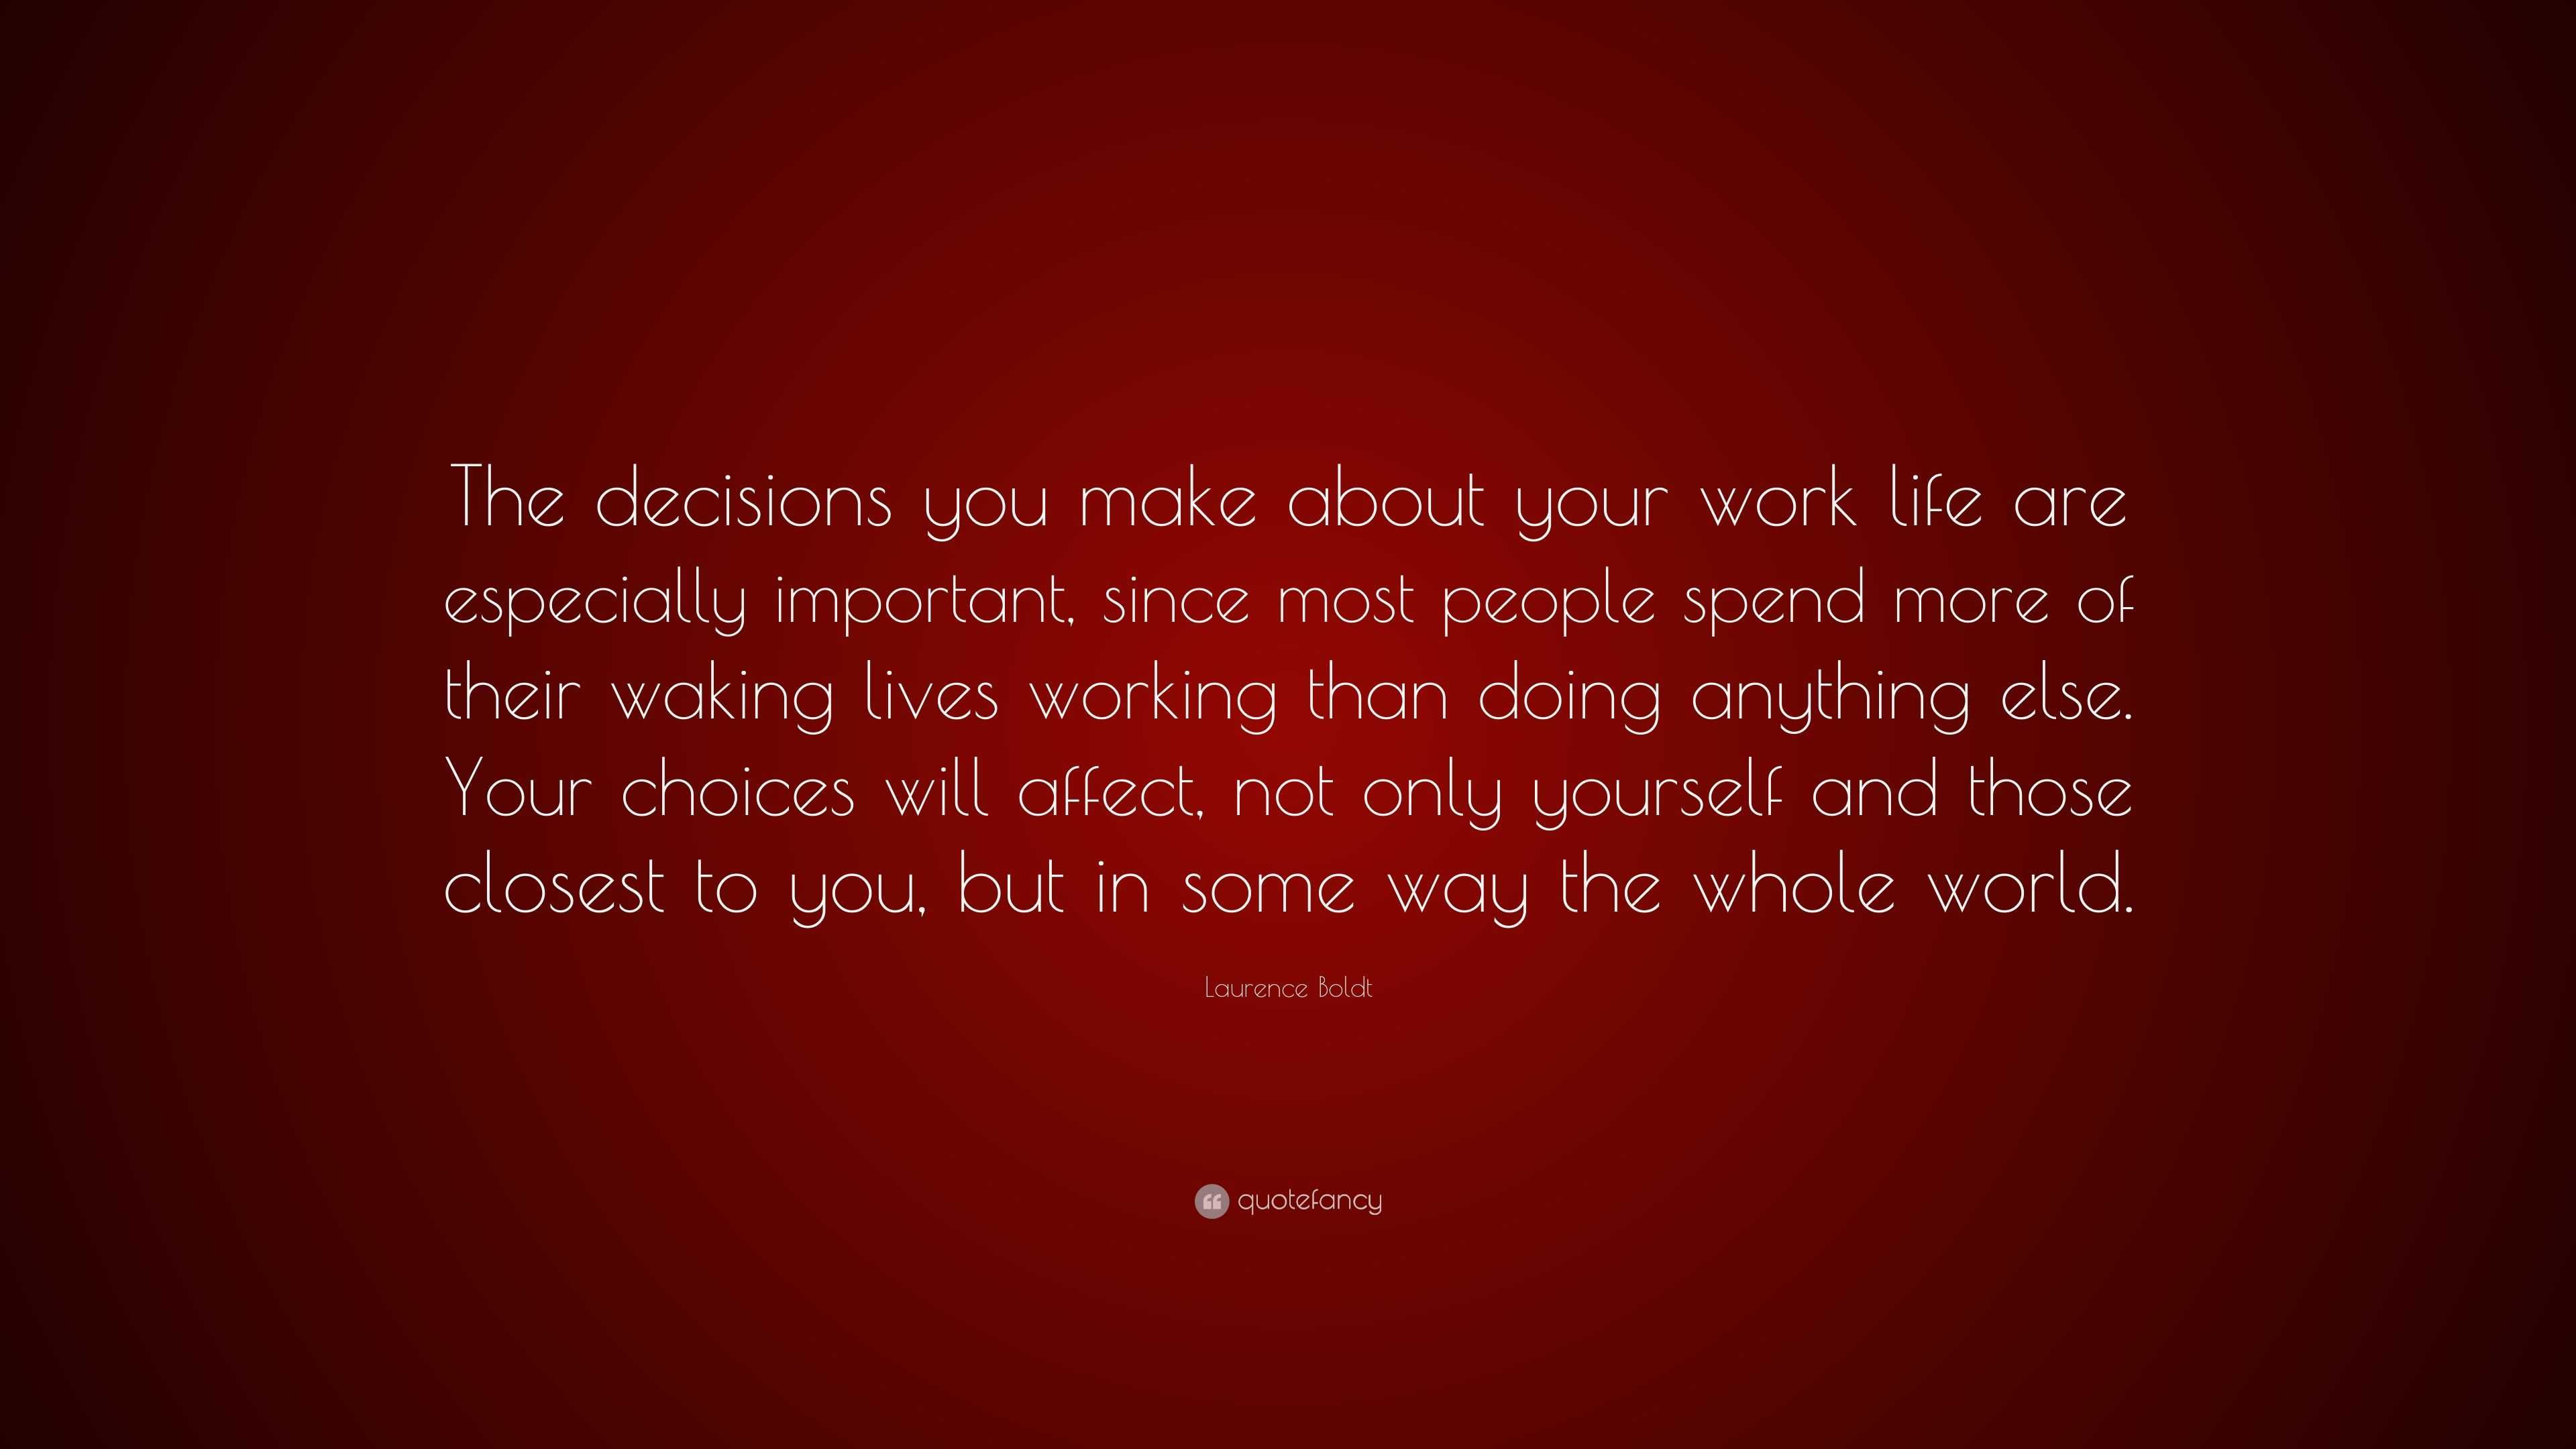 Laurence Boldt Quote “The decisions you make about your work life are especially important